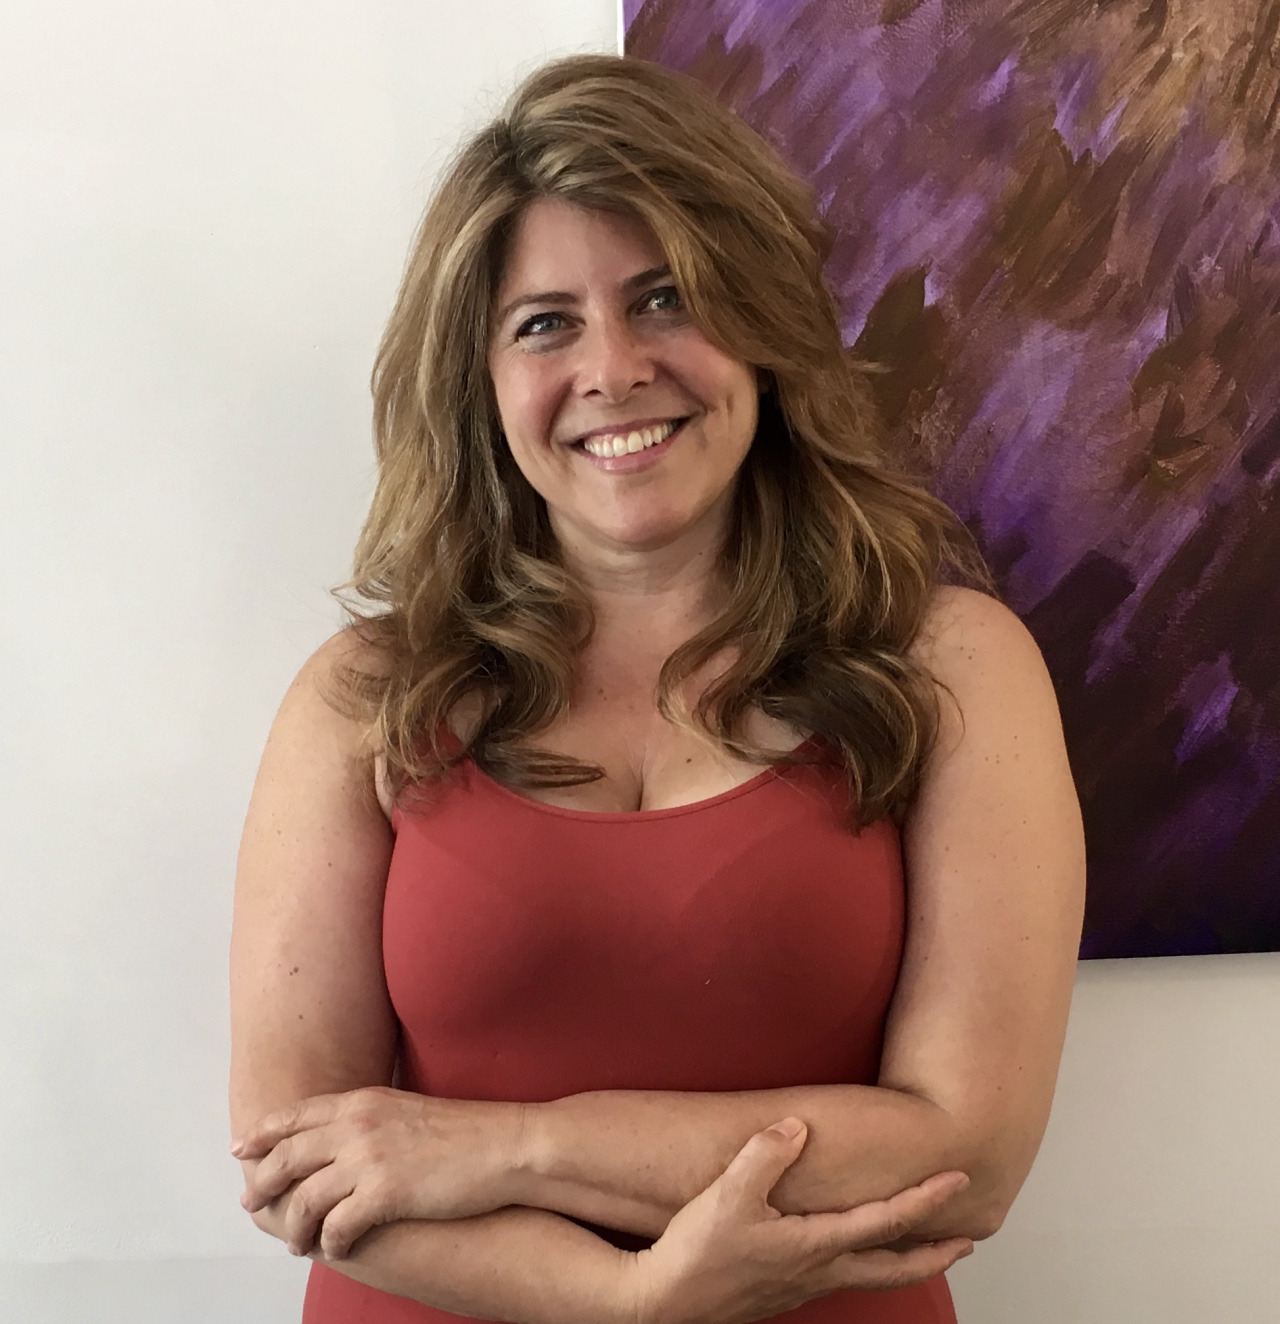 feminist icon Naomi Wolf came by the salon for beautiful blonde highlights and a long wavy layered cut